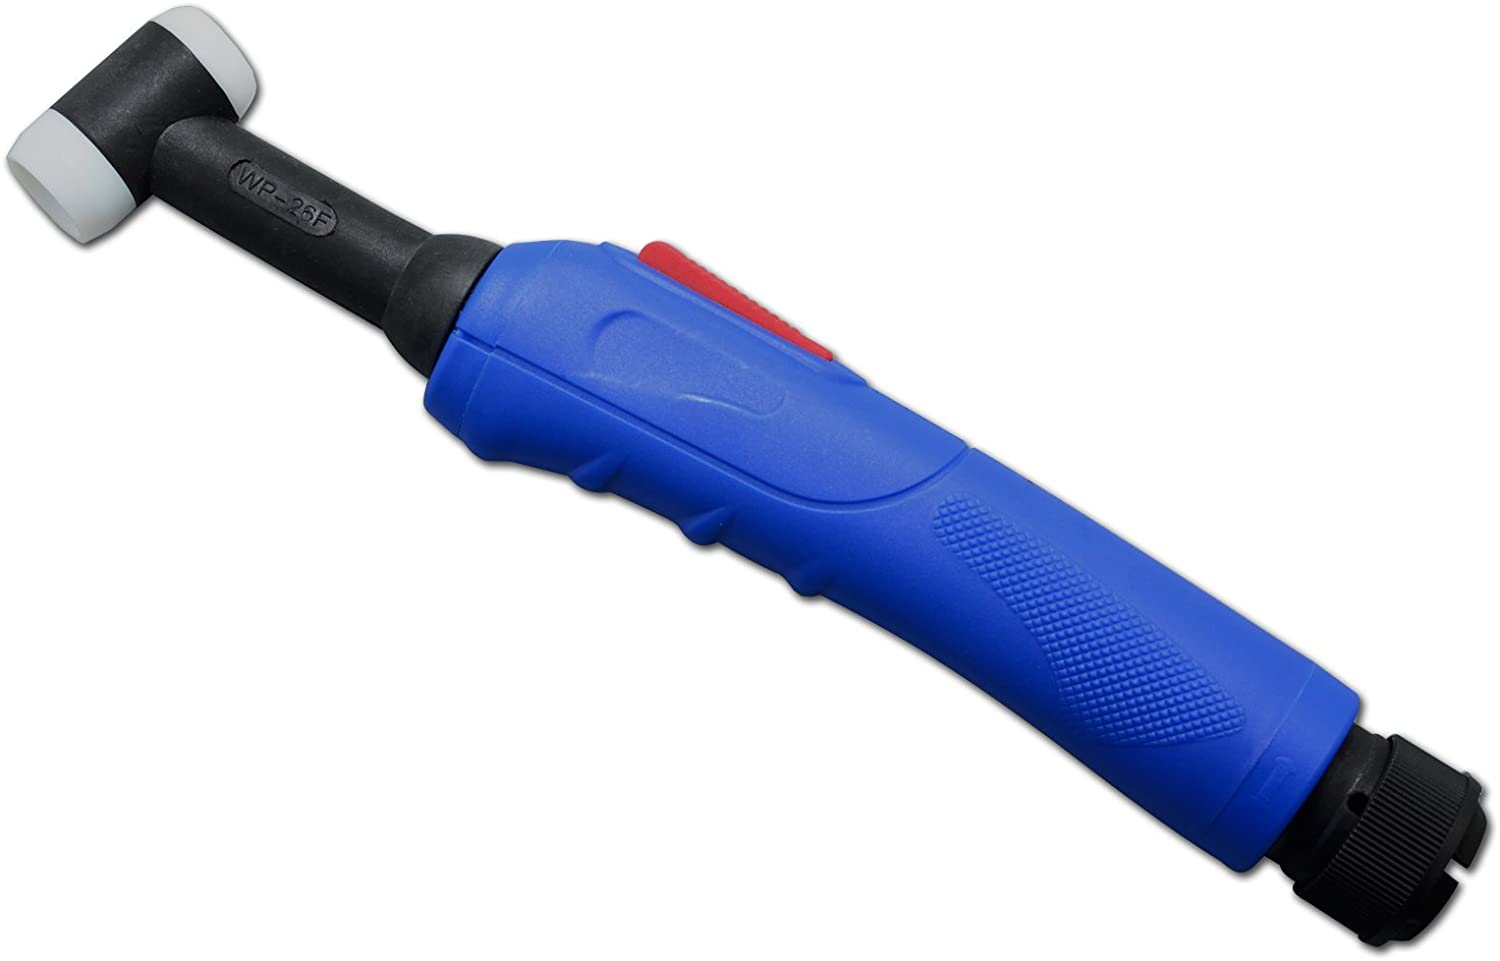 WP-26 SR-26 TIG Welding Torch Head body 200A Air-Cooled (26F Flexible Euro style Top) 